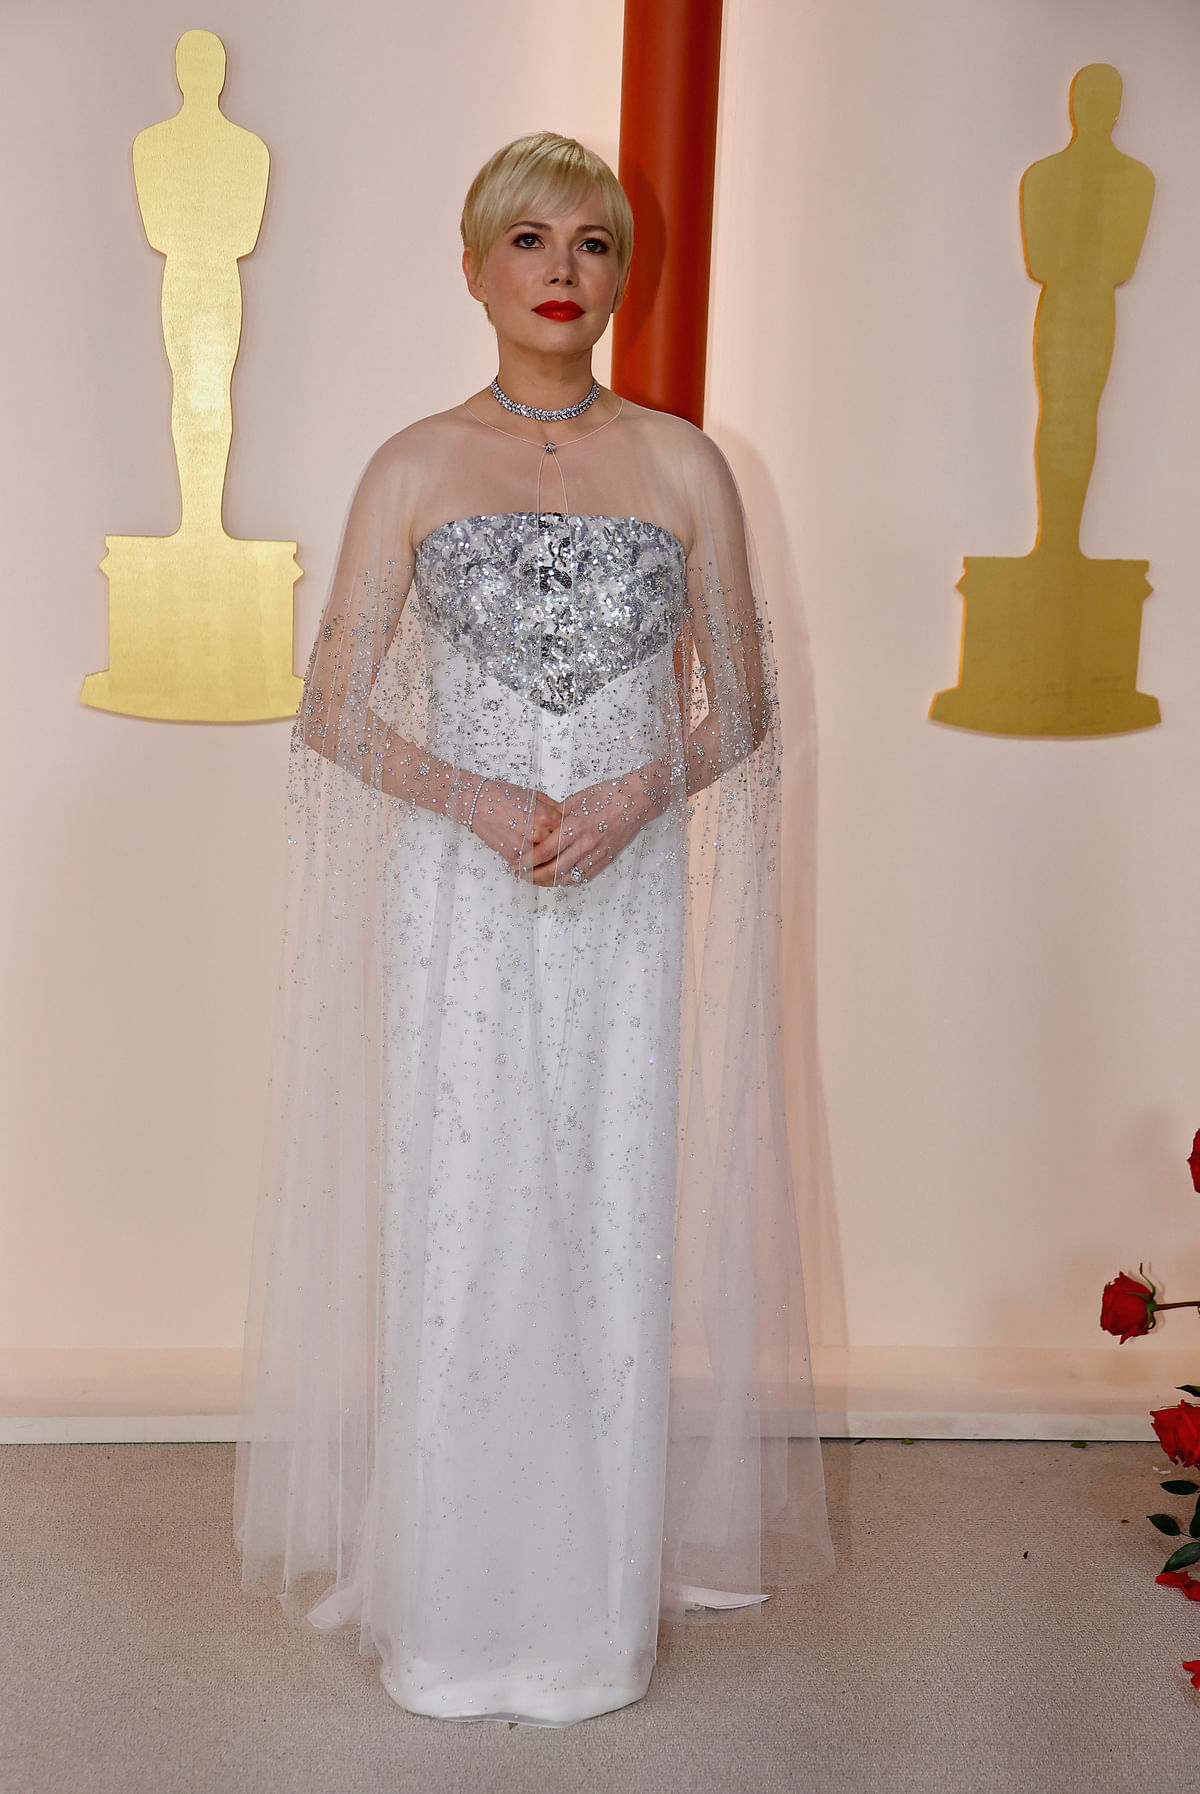 Michelle Williams poses on the champagne-colored red carpet during the Oscars arrivals at the 95th Academy Awards in Hollywood, Los Angeles, California, US, 12 March, 2023. 